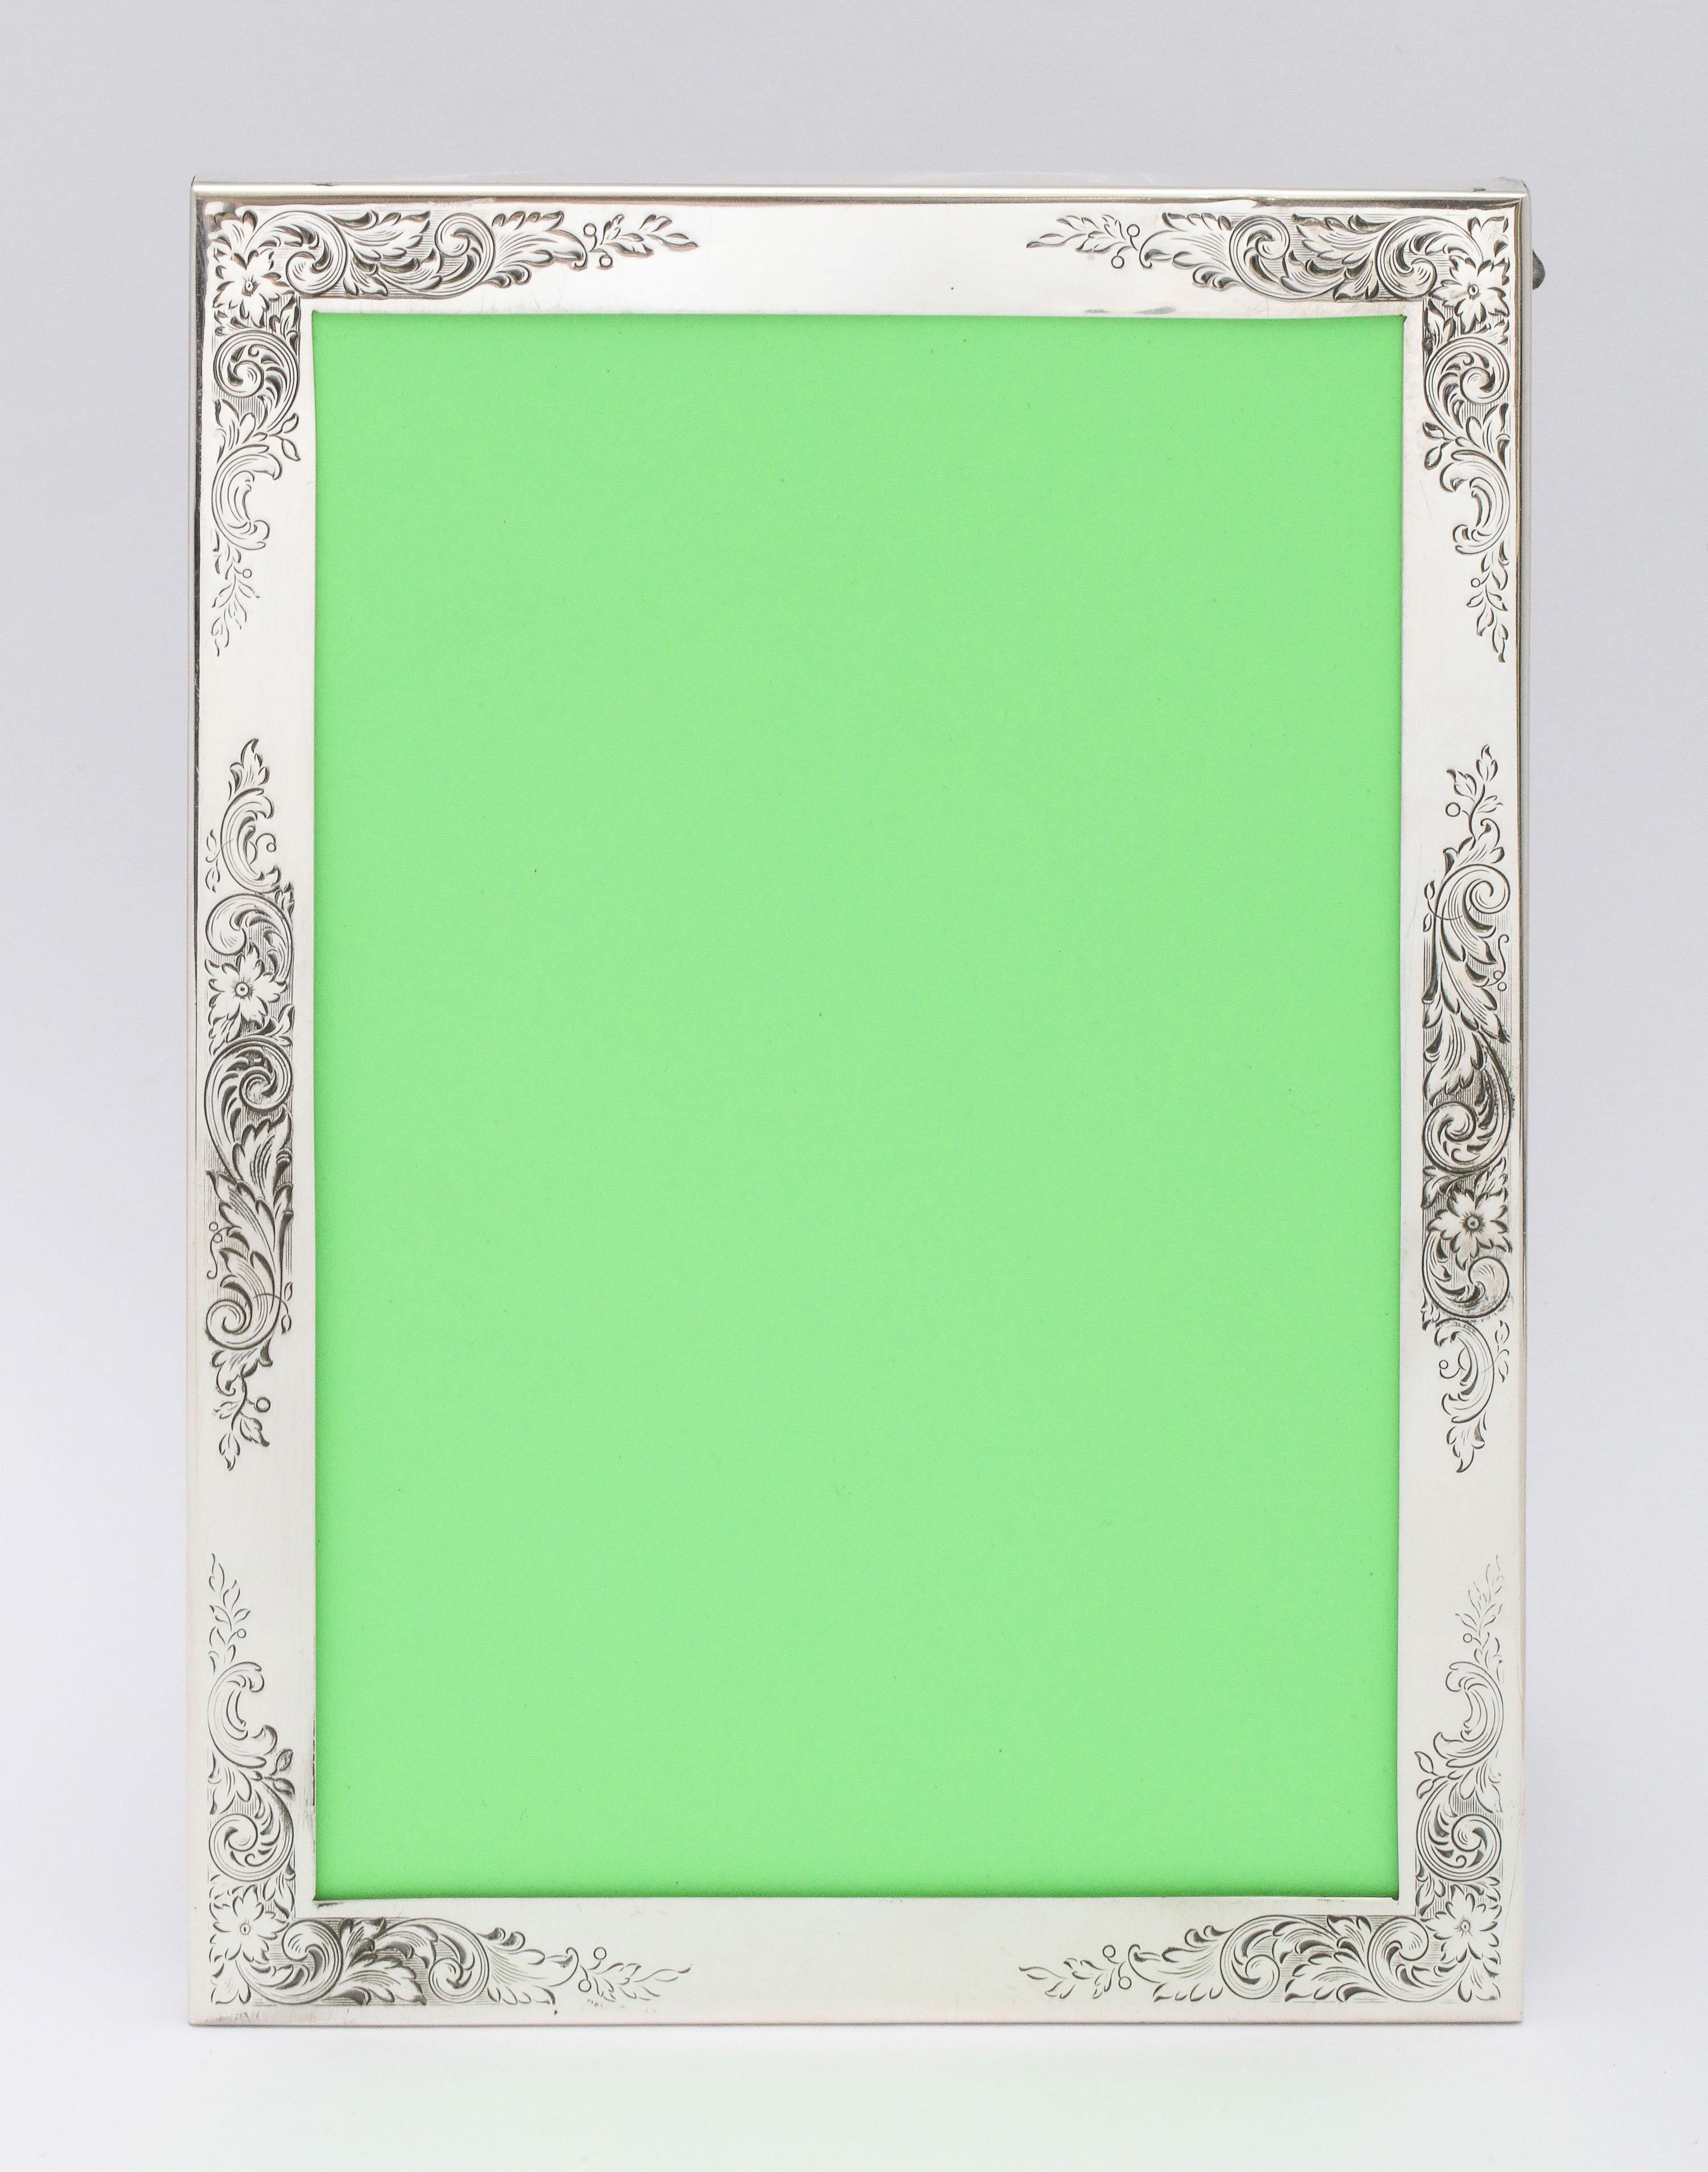 Edwardian-style, sterling silver picture frame with wood back, Gorham Manufacturing Co., Providence, Rhode Island, Ca. 1940's. Frame will stand both horizontally and vertically. Outside measurements of frame are 7 3/4 inches high x 5 1/2 inches wide